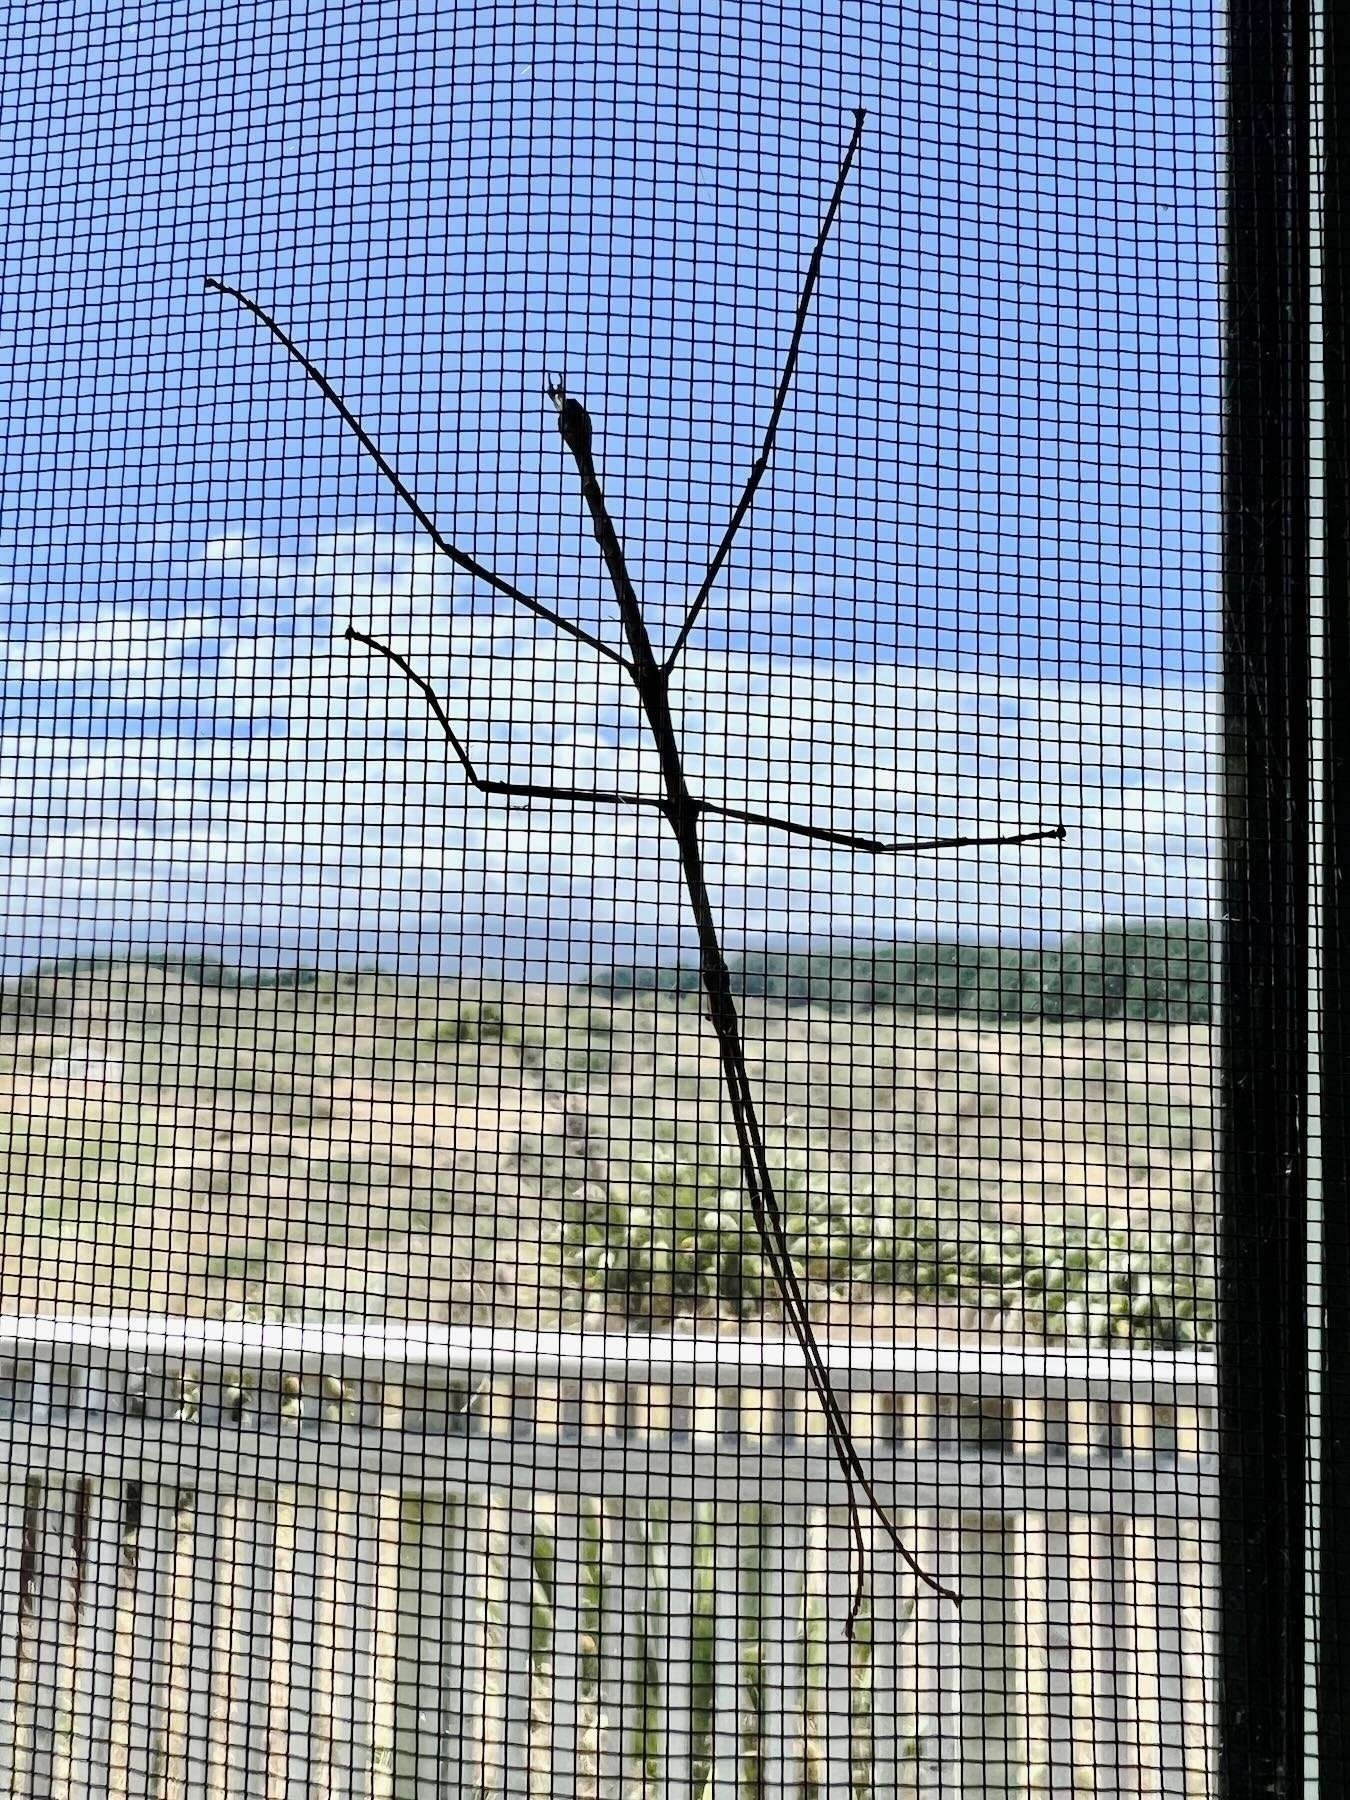 Stick insect on insect screen. 